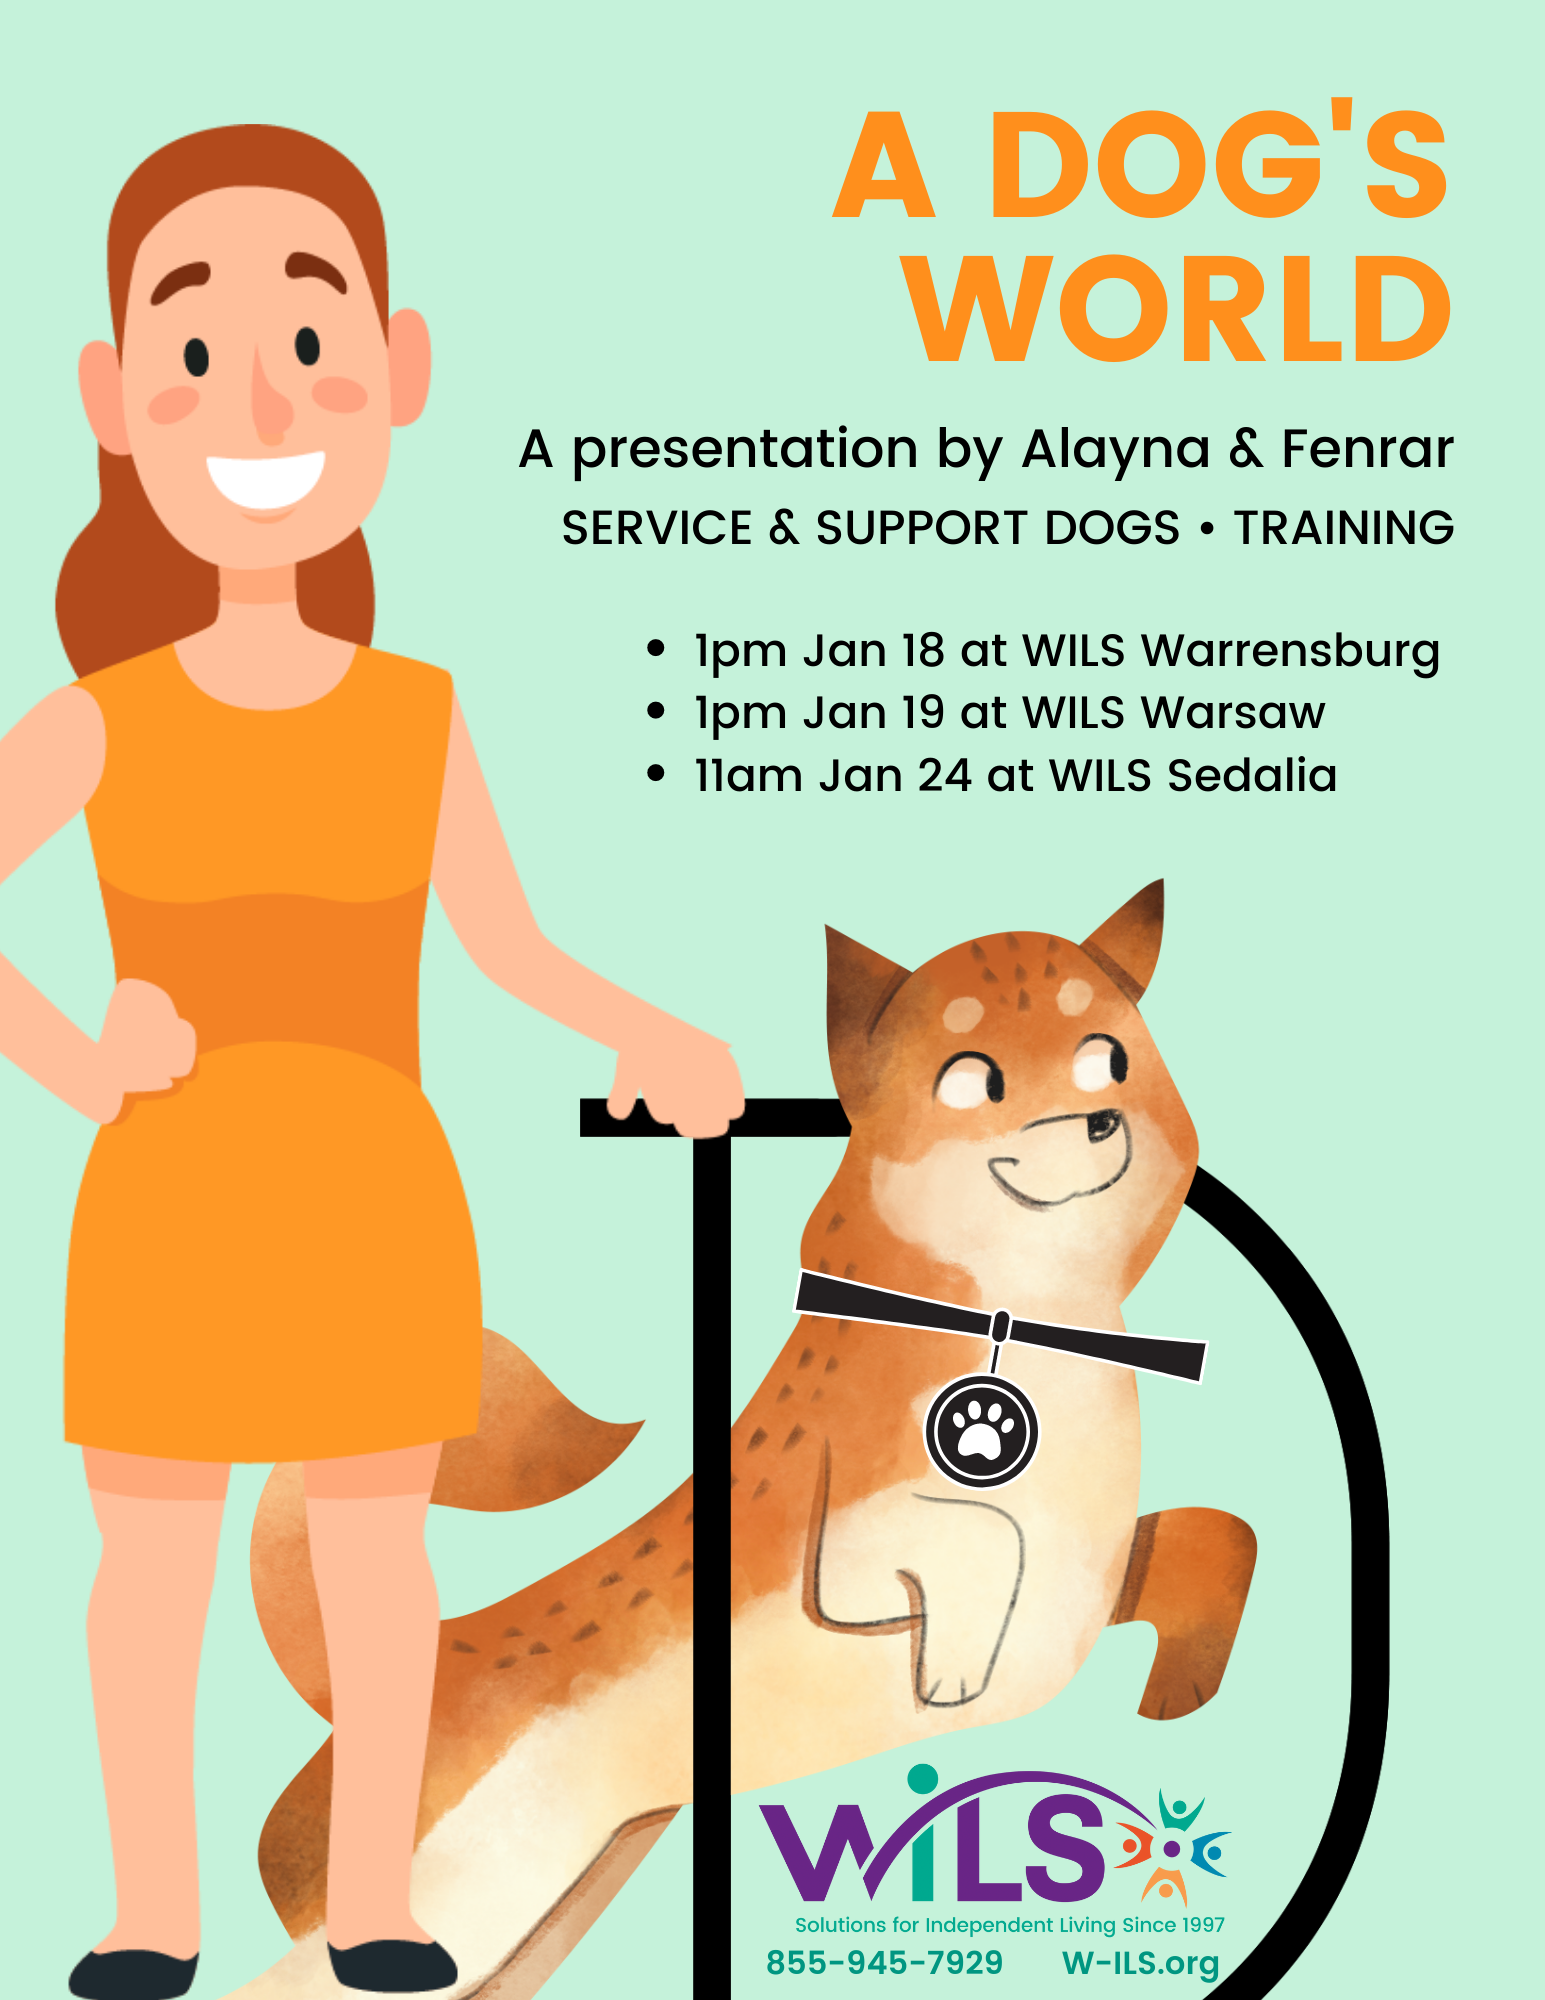 A Dg's World. A service animal presentation by Alayna and her dog. 1pm Jan 18 at WILS Warrensburg 1pm Jan 19 at WILS Warsaw 11am Jan 24 at WILS Sedalia